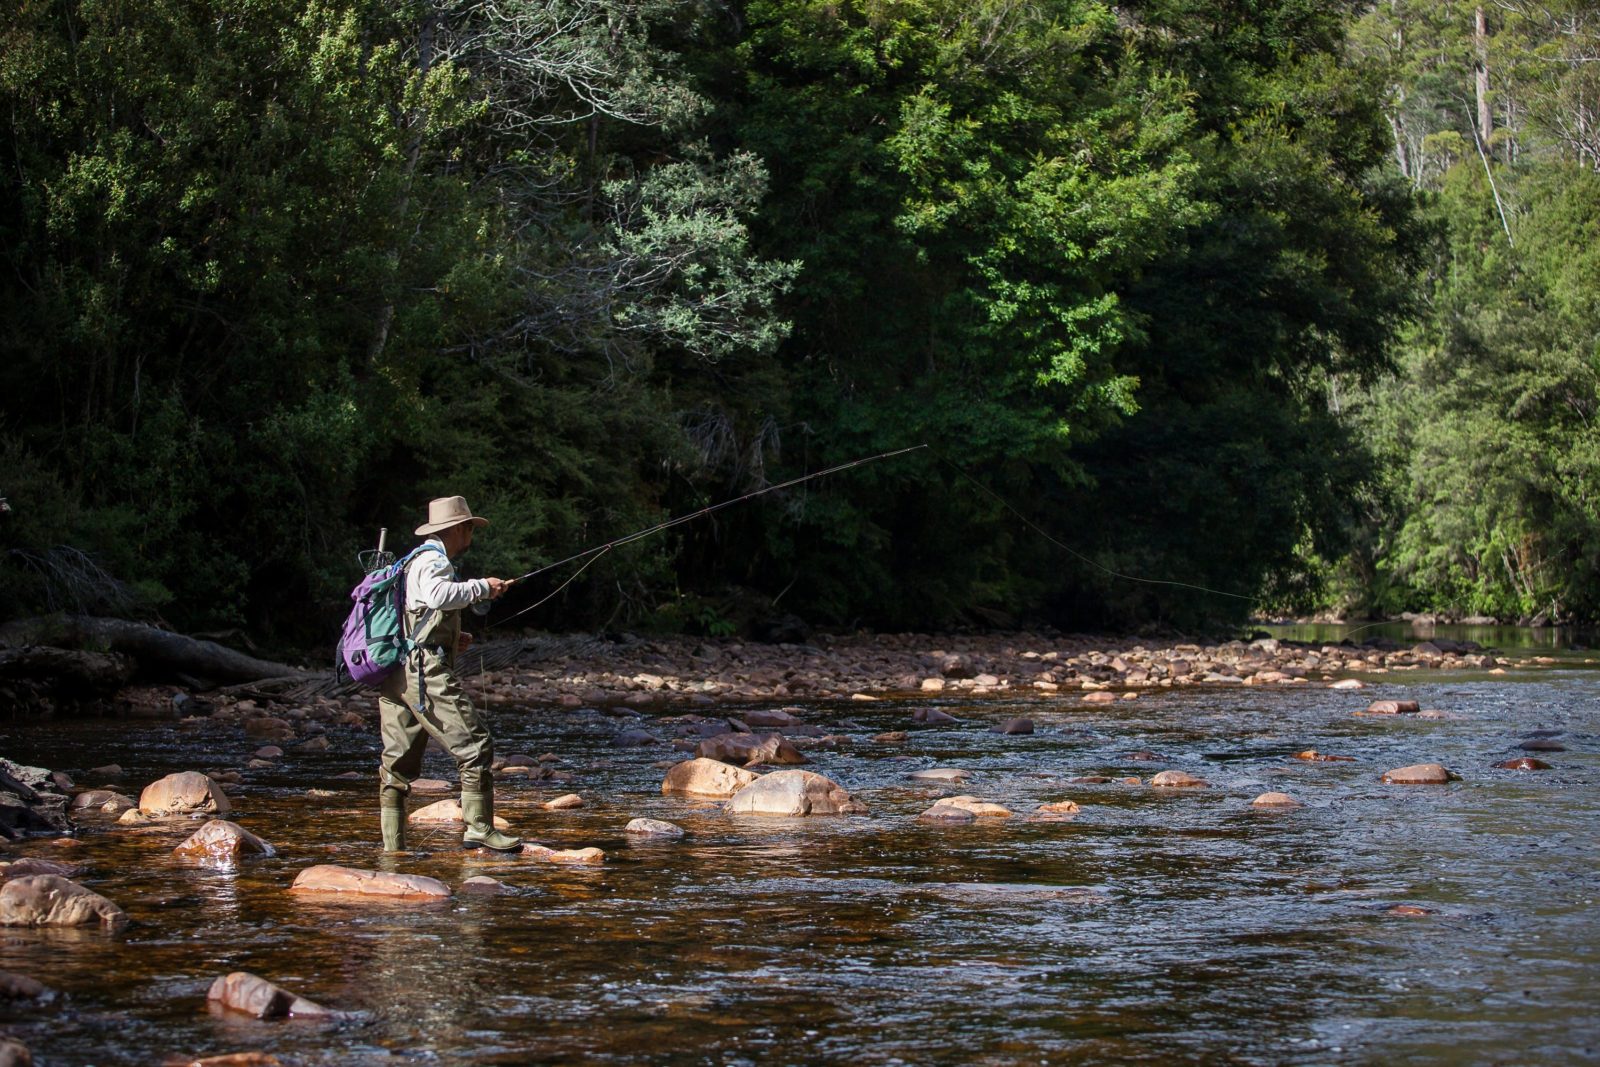 A man holds a fishing rod, on the bank of a river